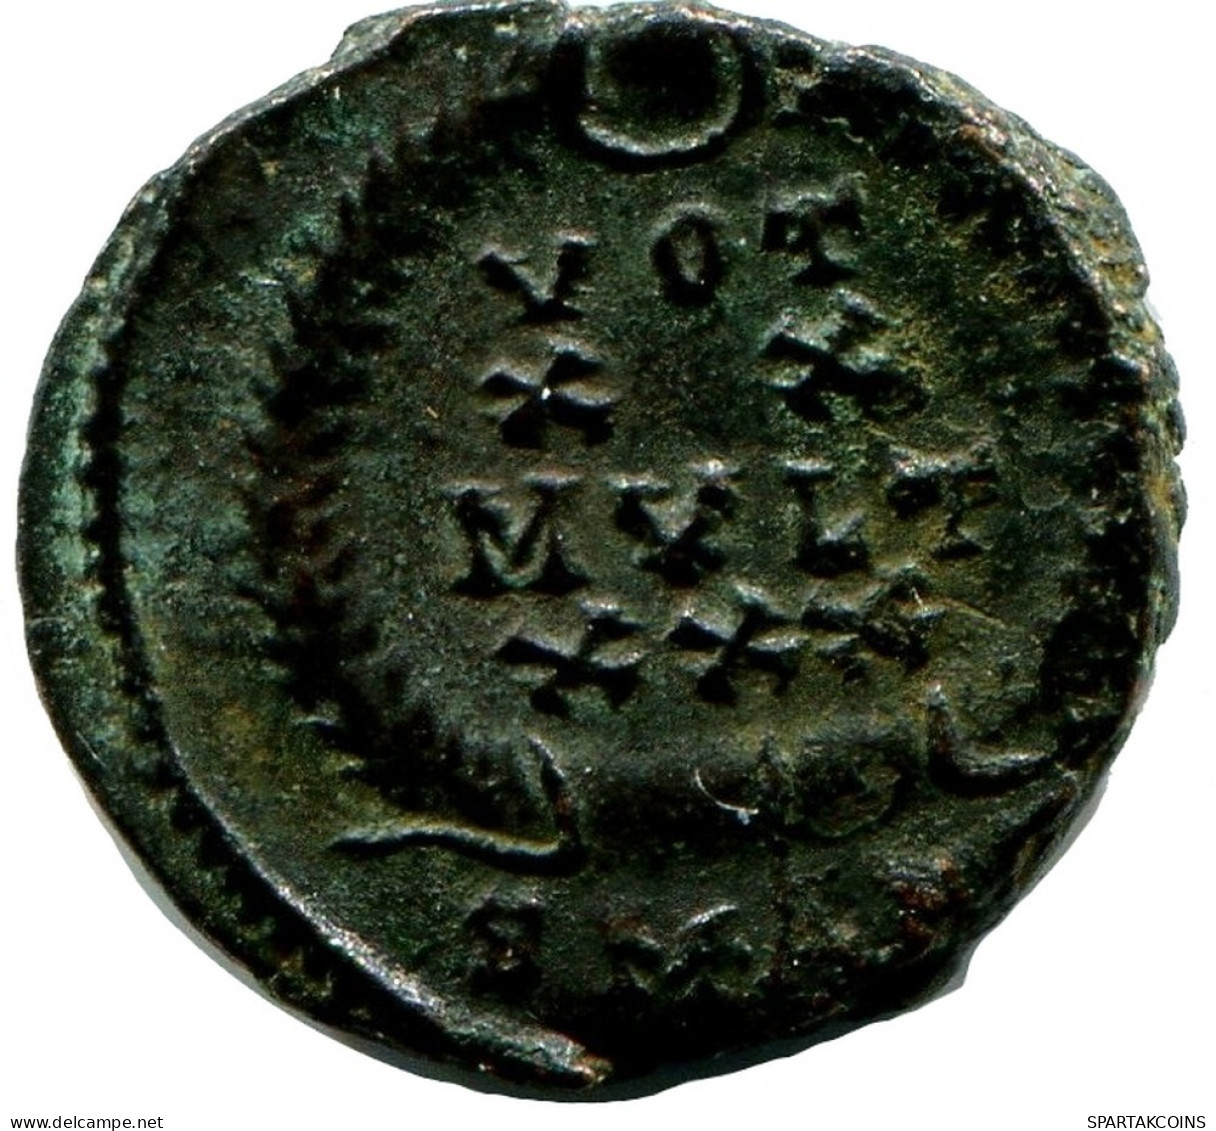 CONSTANTIUS II MINTED IN ANTIOCH FOUND IN IHNASYAH HOARD EGYPT #ANC11255.14.F.A - The Christian Empire (307 AD To 363 AD)